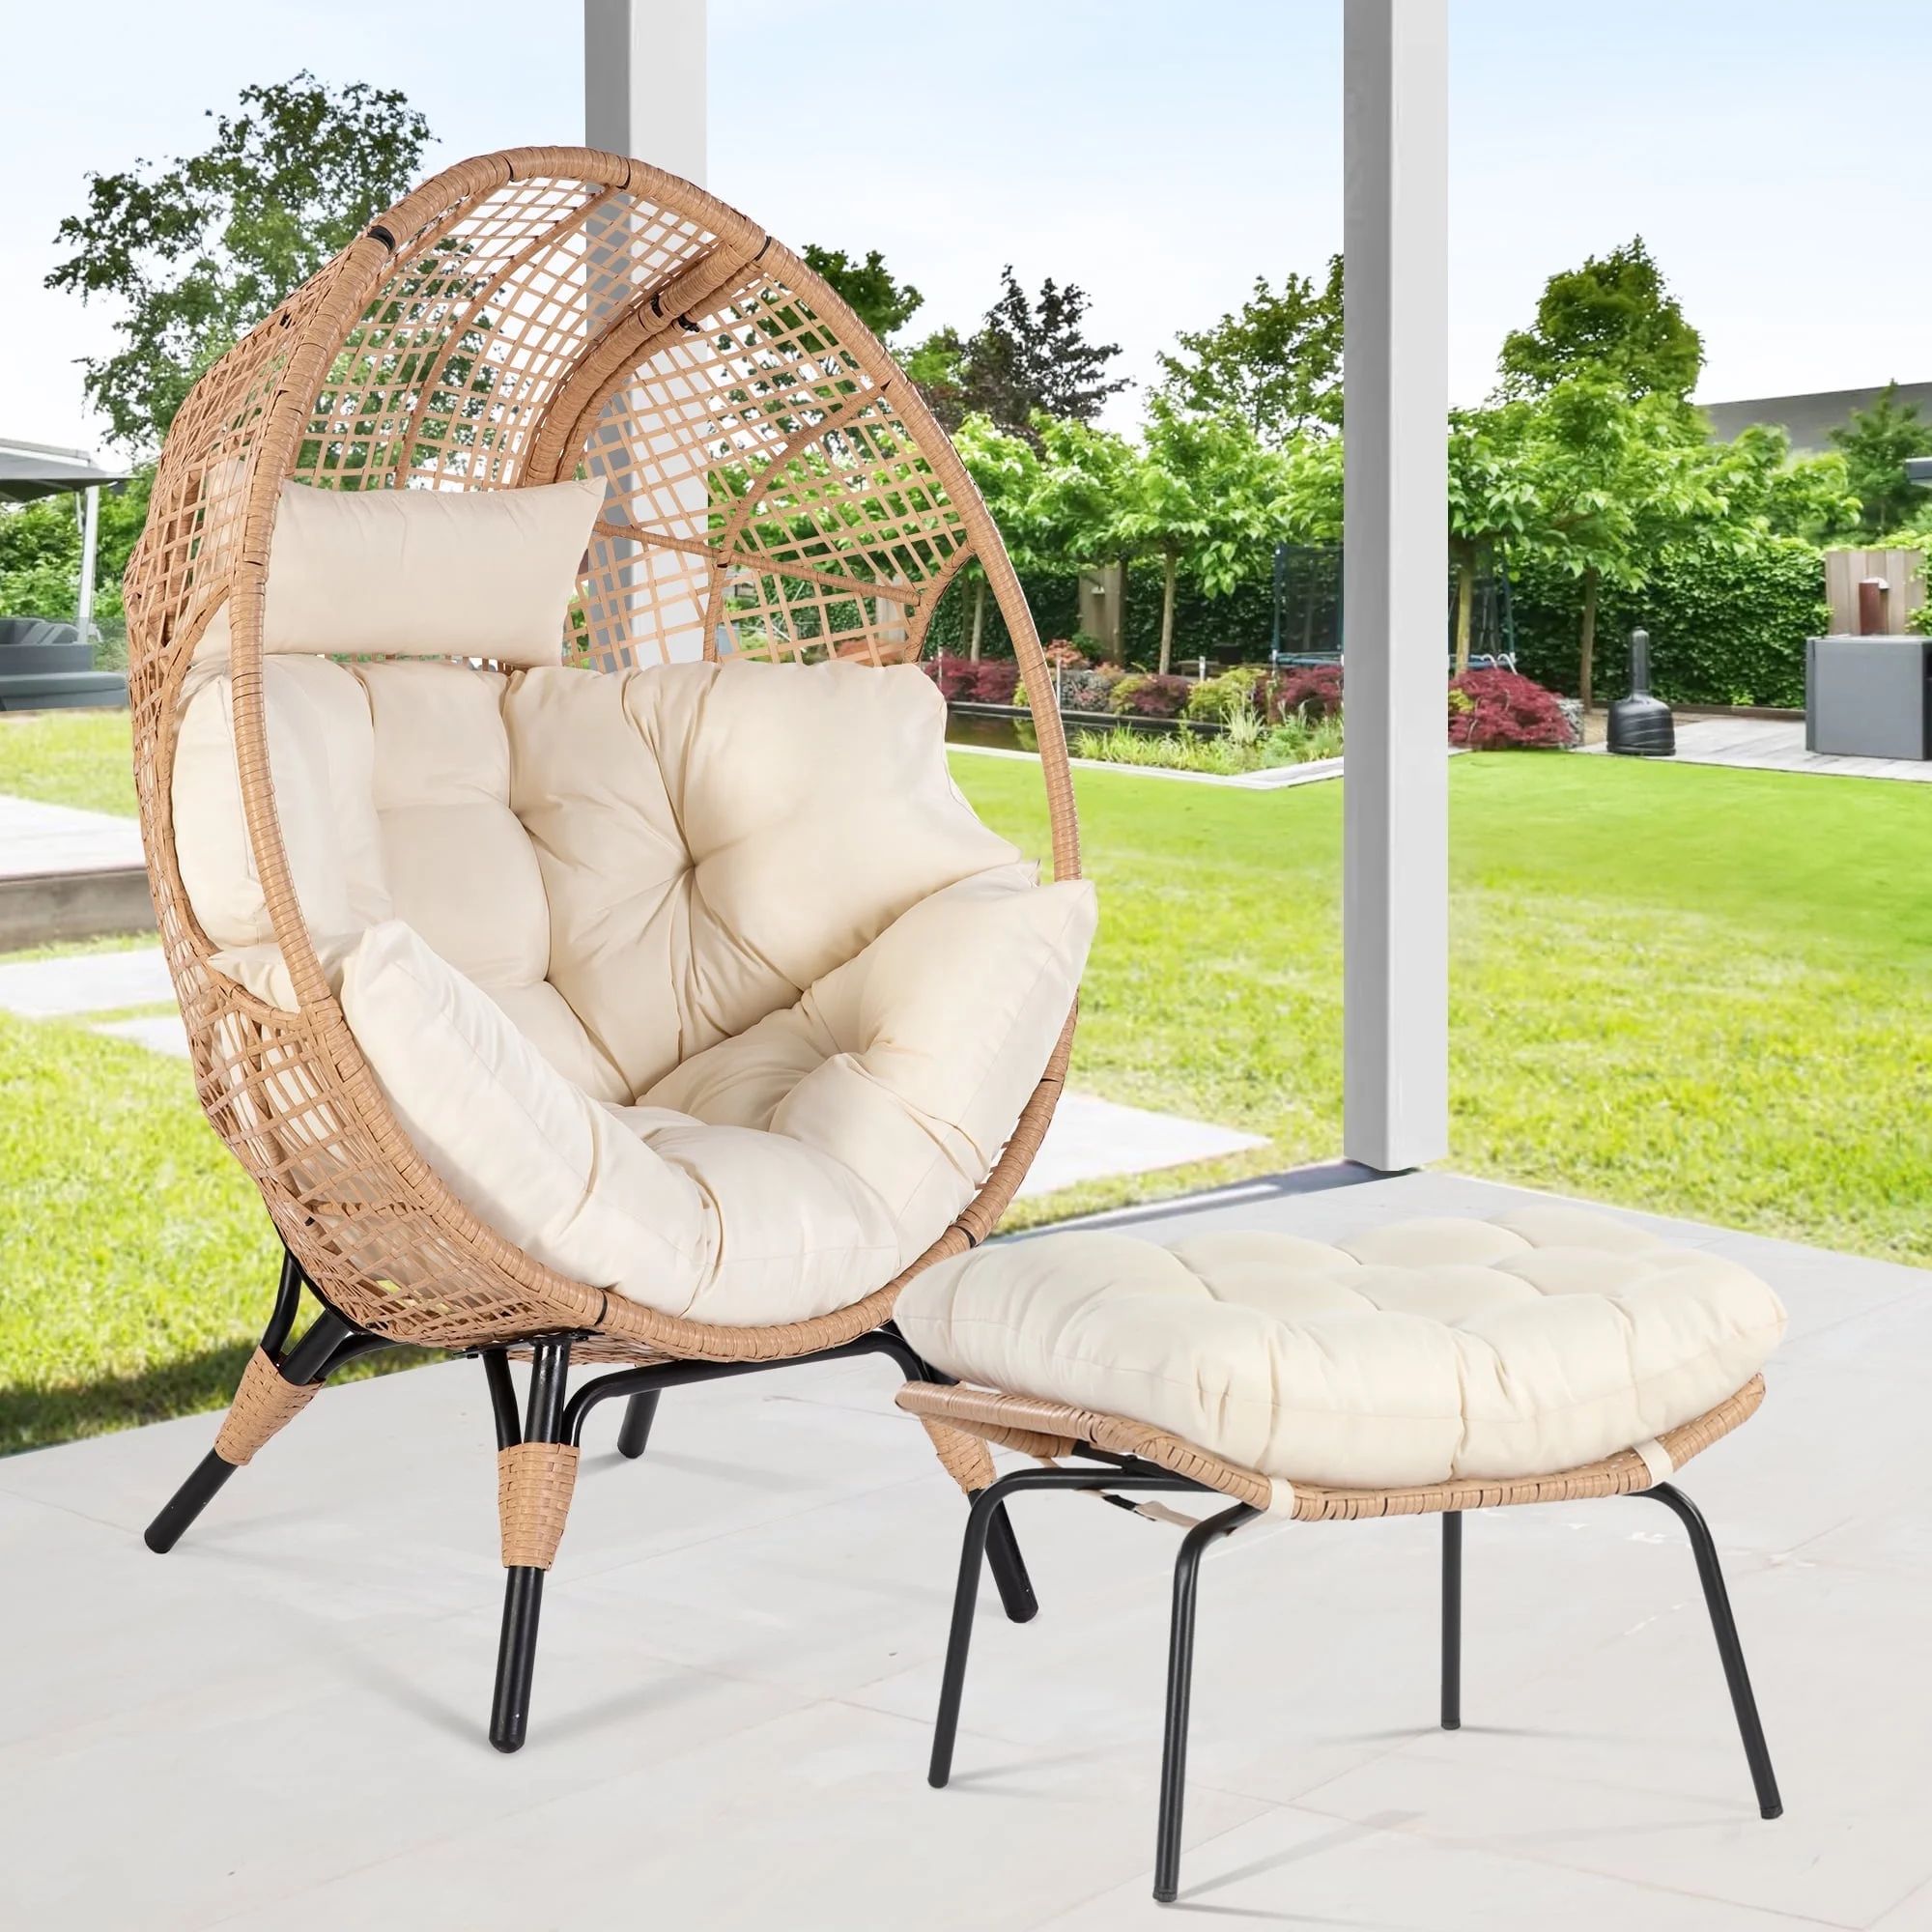 NICESOUL 2 Pieces Egg Chair Outdoor Basket Chairs Wicker Patio Egg Chairs with Ottoman Rattan Tea... | Walmart (US)